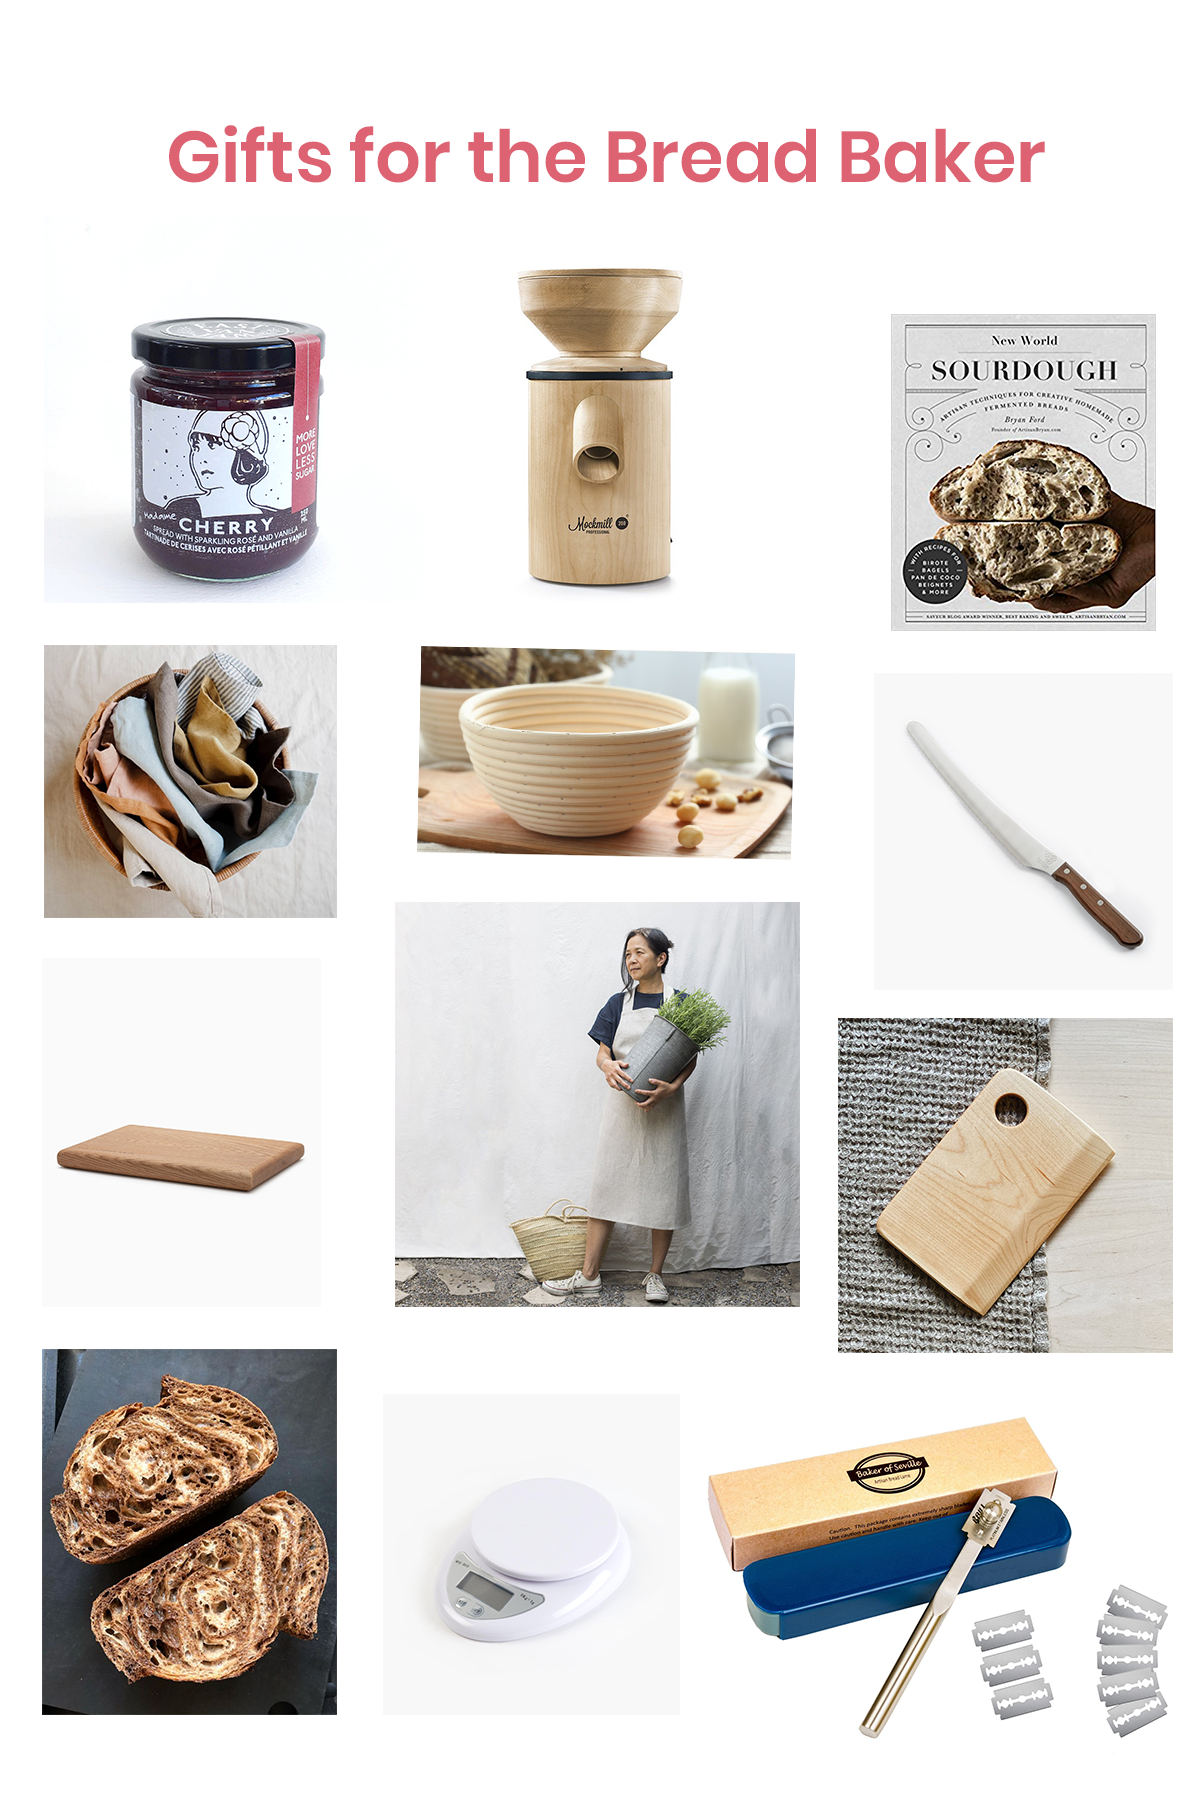 An image set showing the gift ideas for bread bakers.